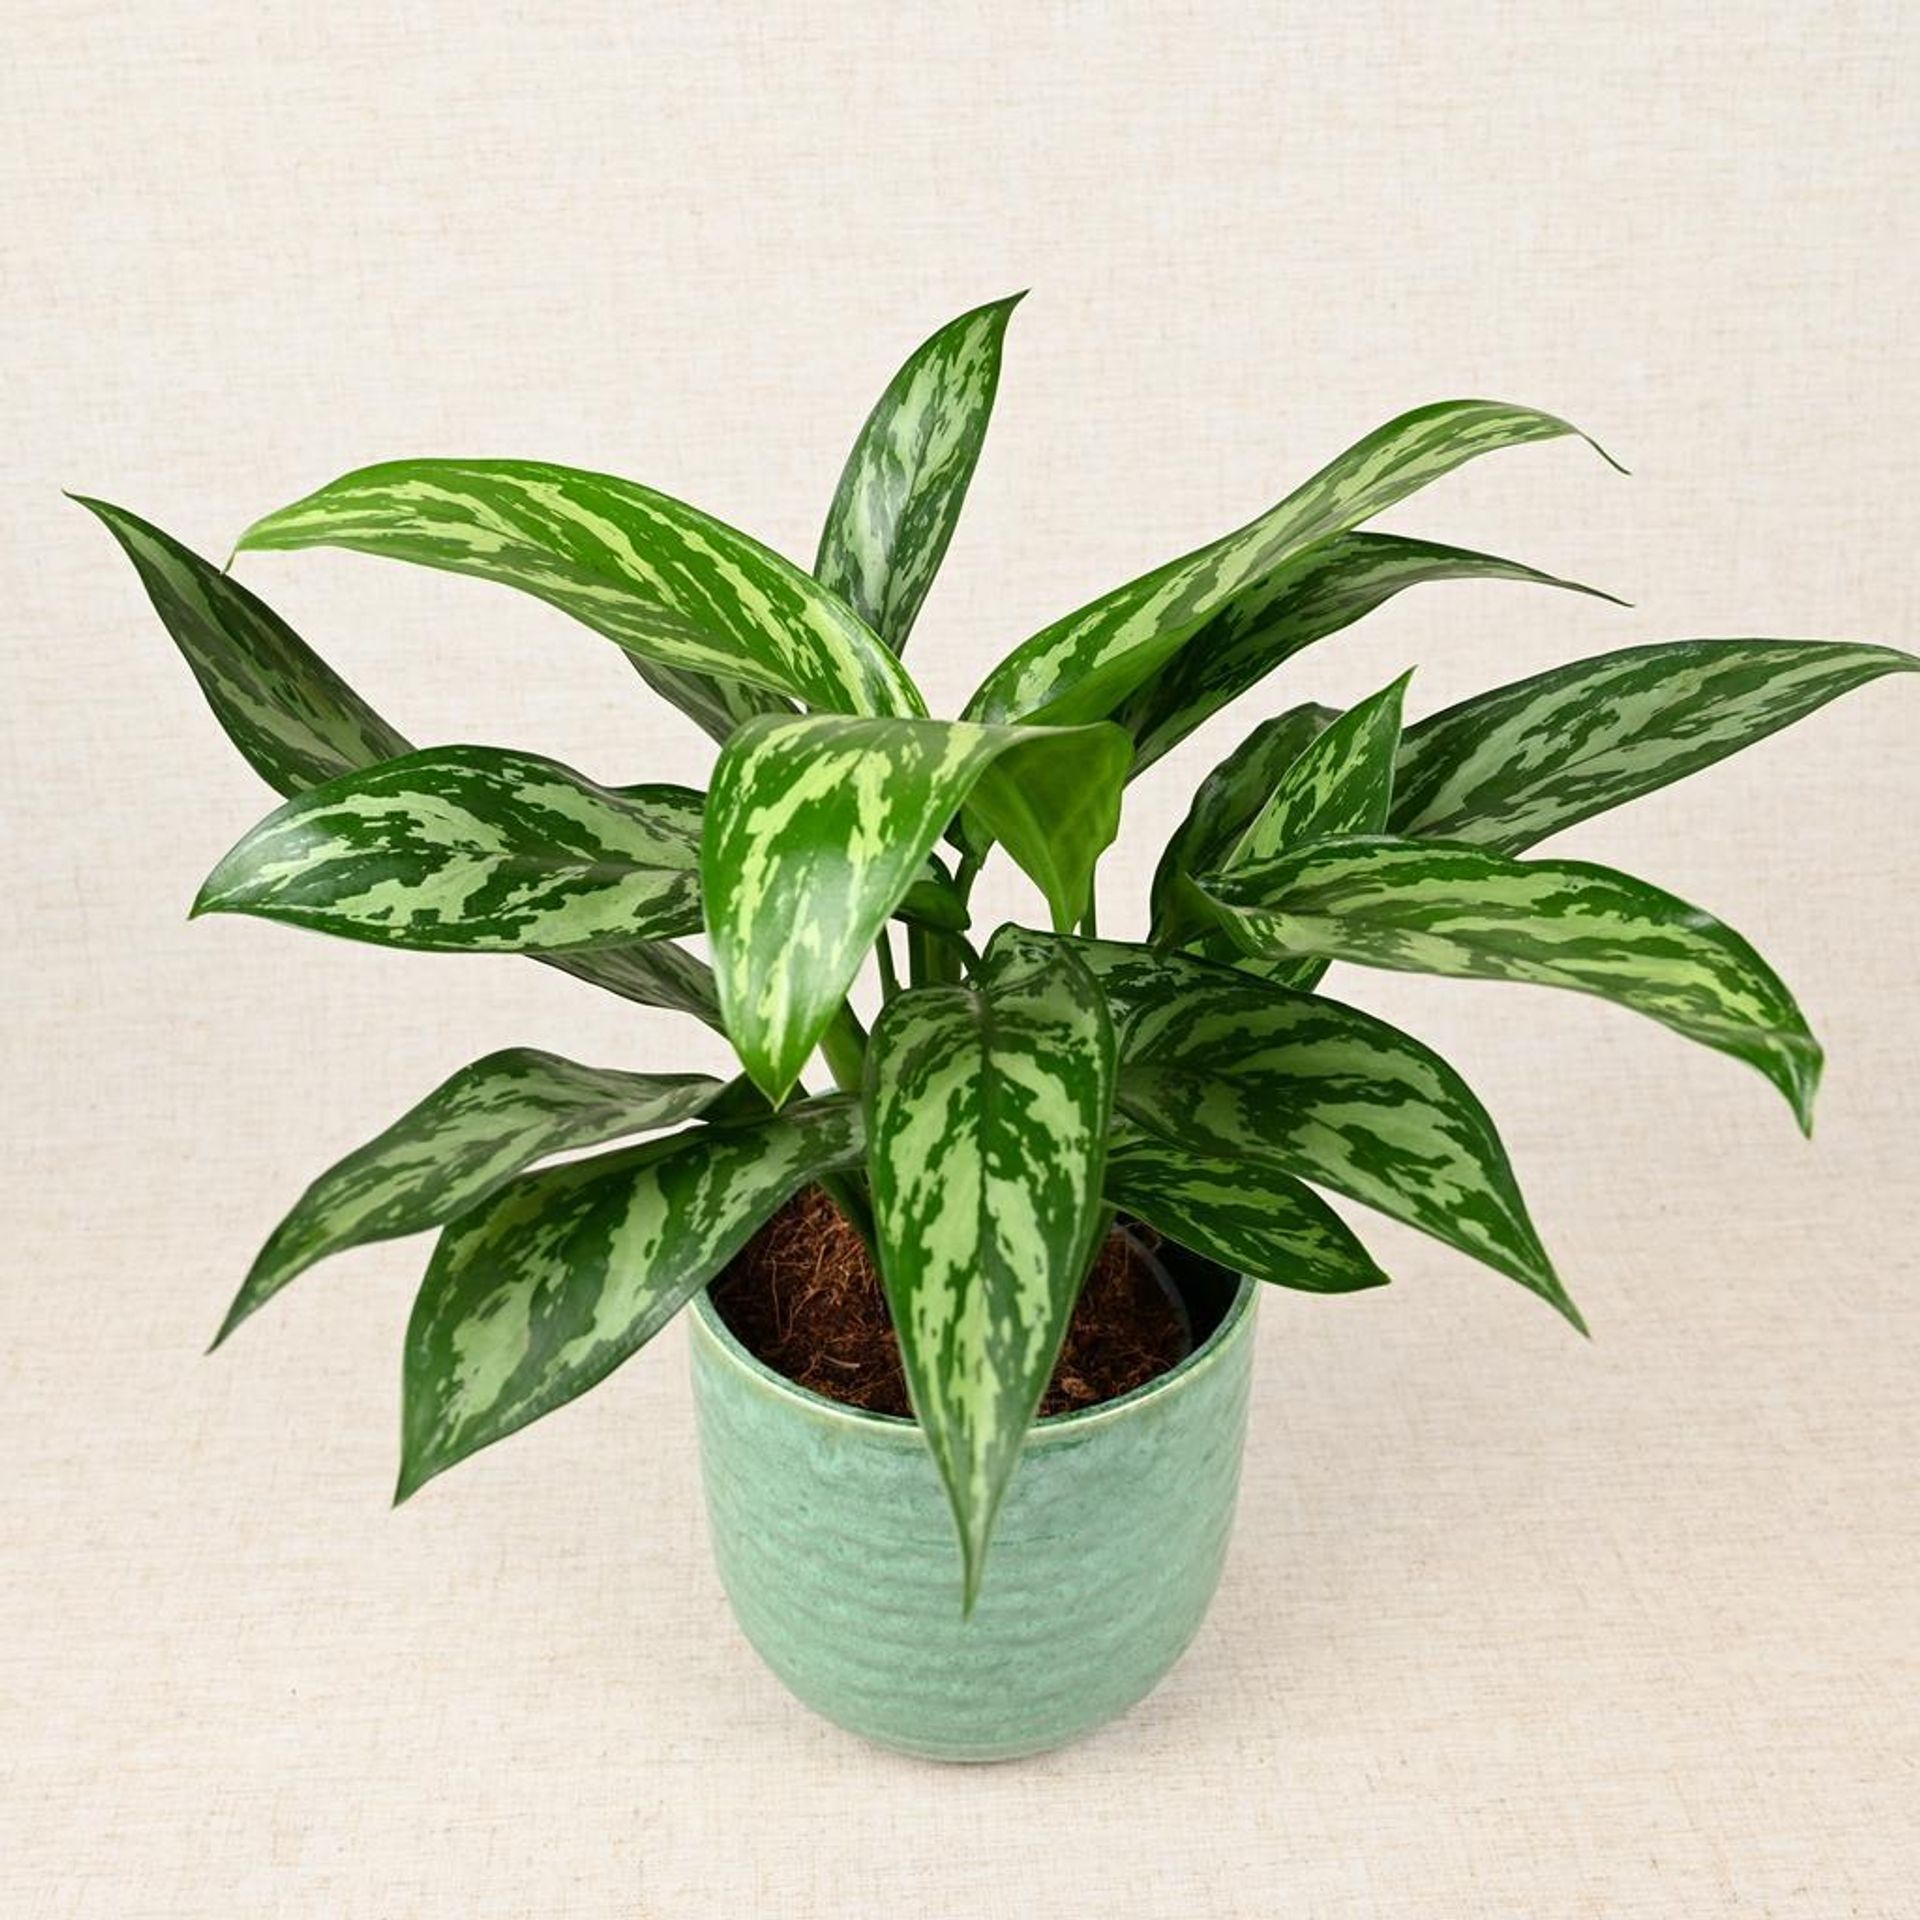 Tips for growing Aglaonema